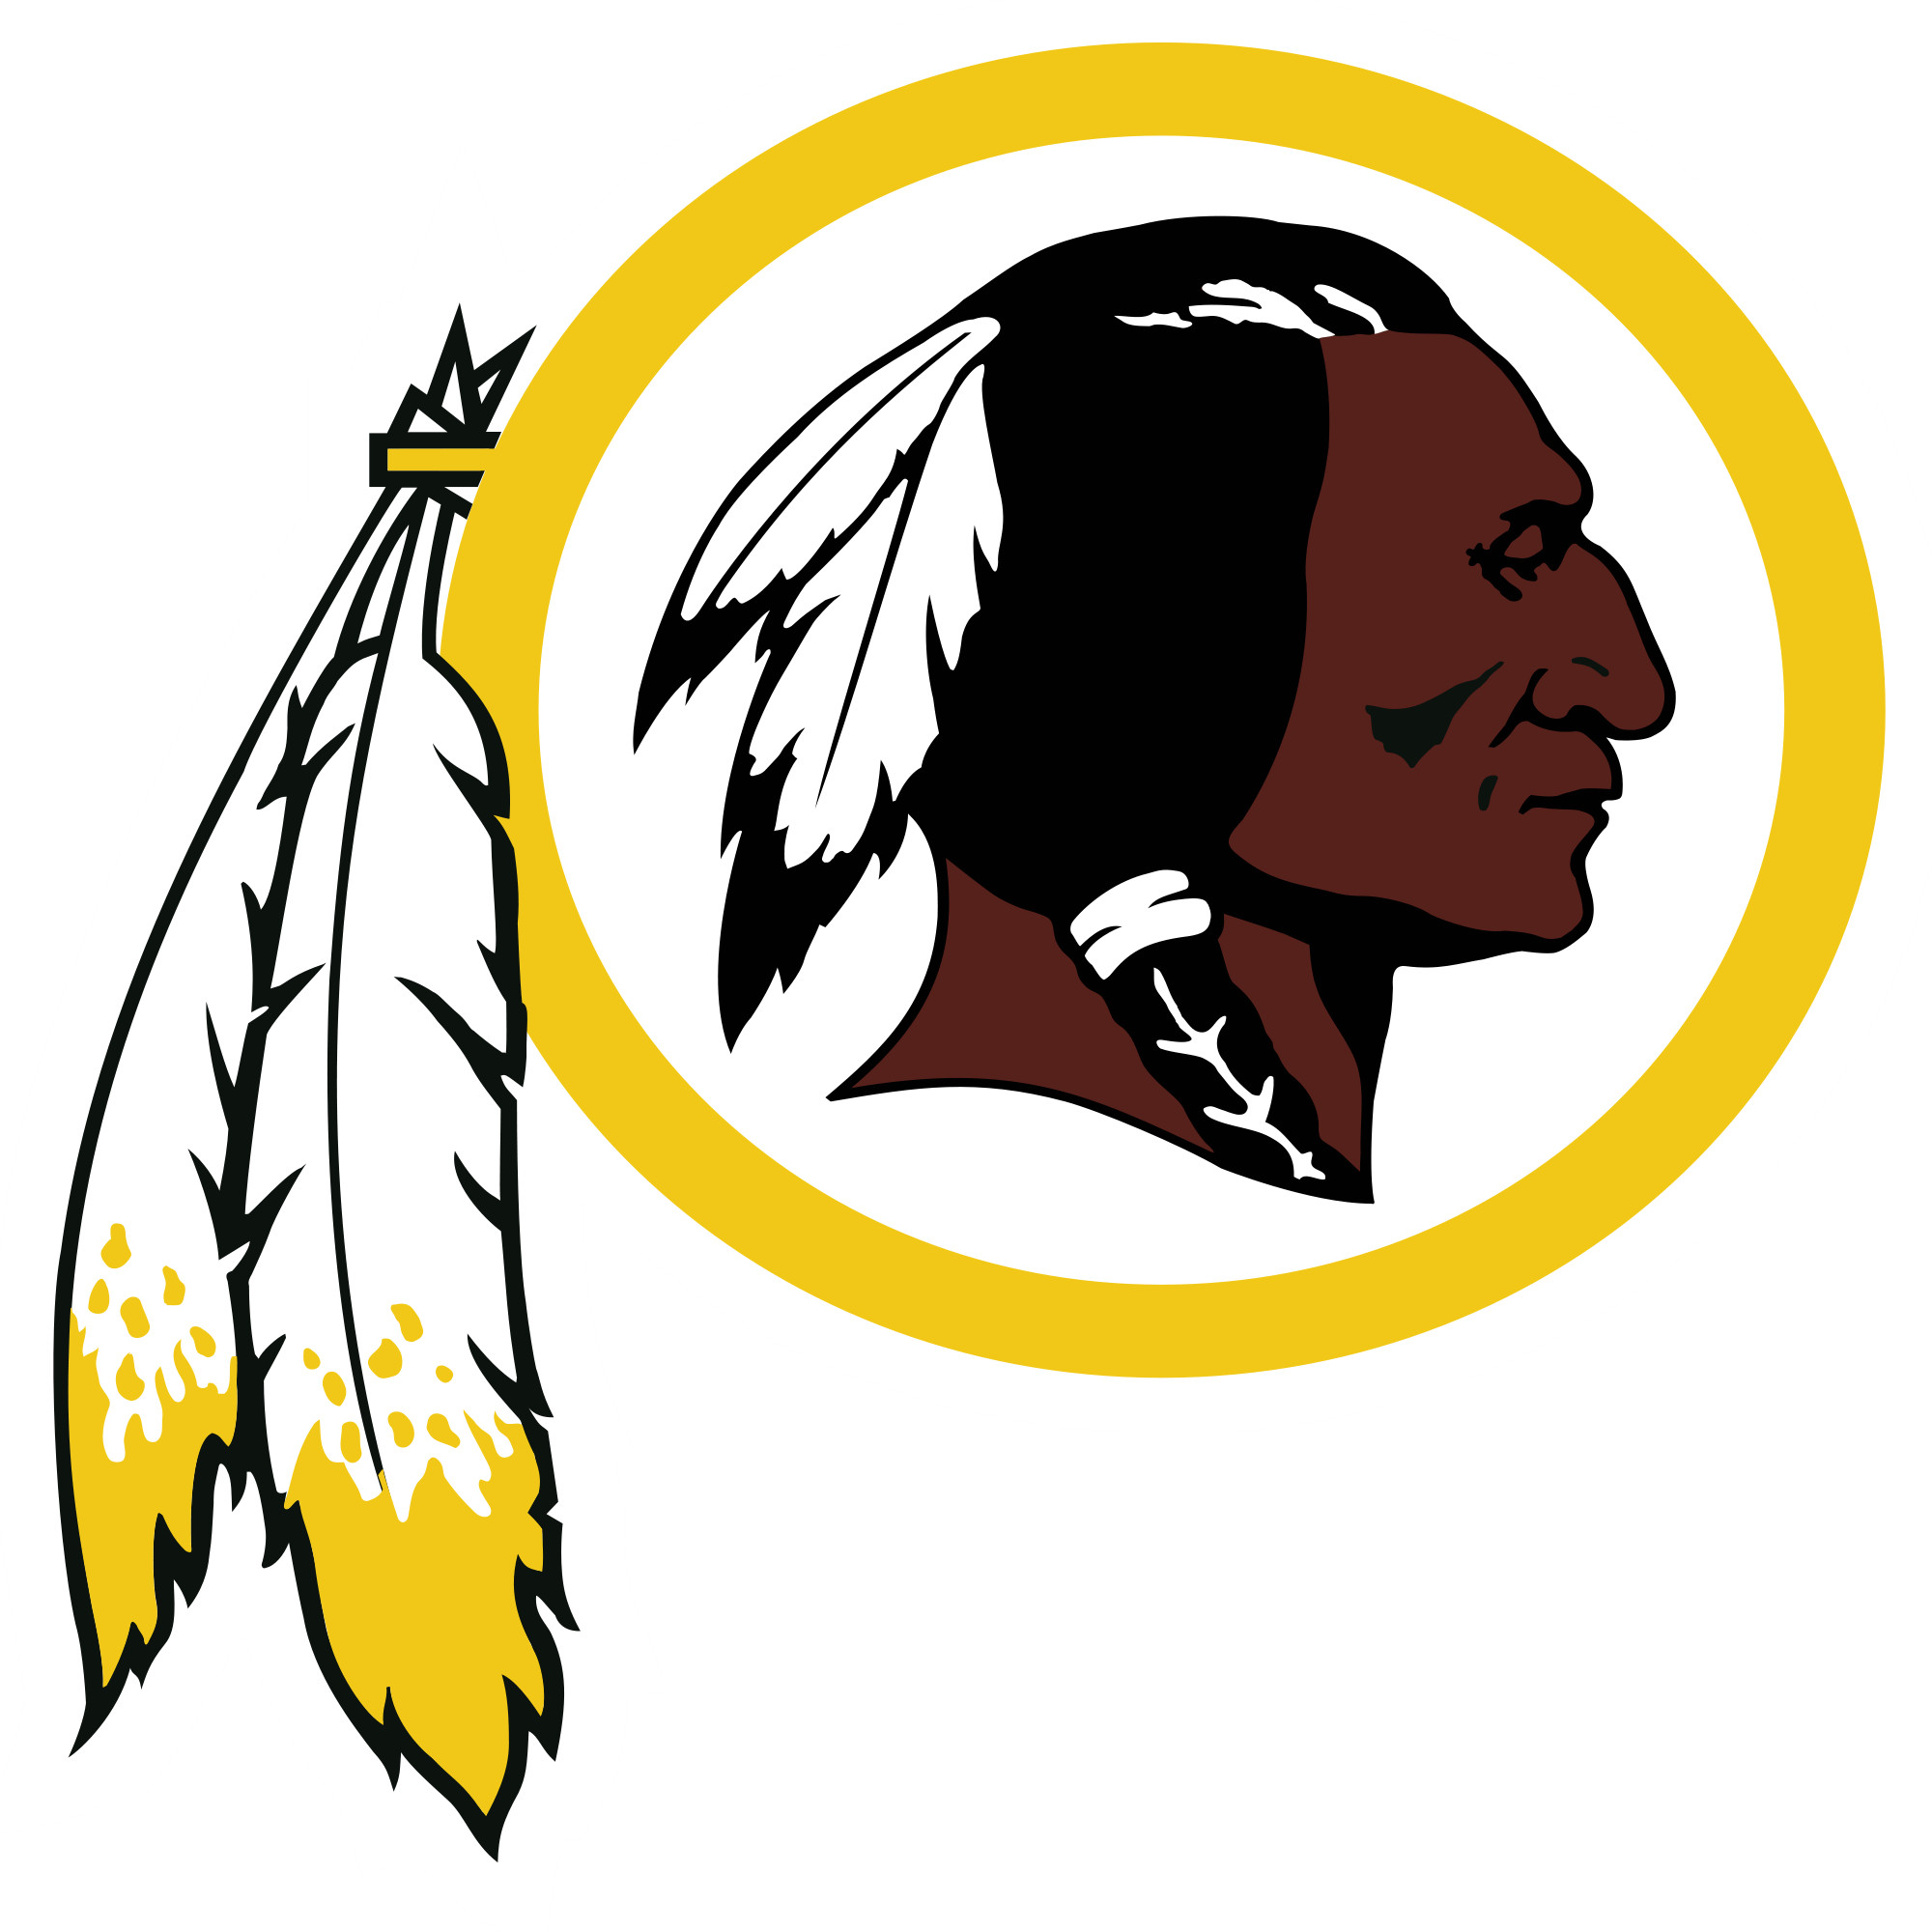 2000x2000 Redskins Wallpapers 2016 - Wallpaper Cave